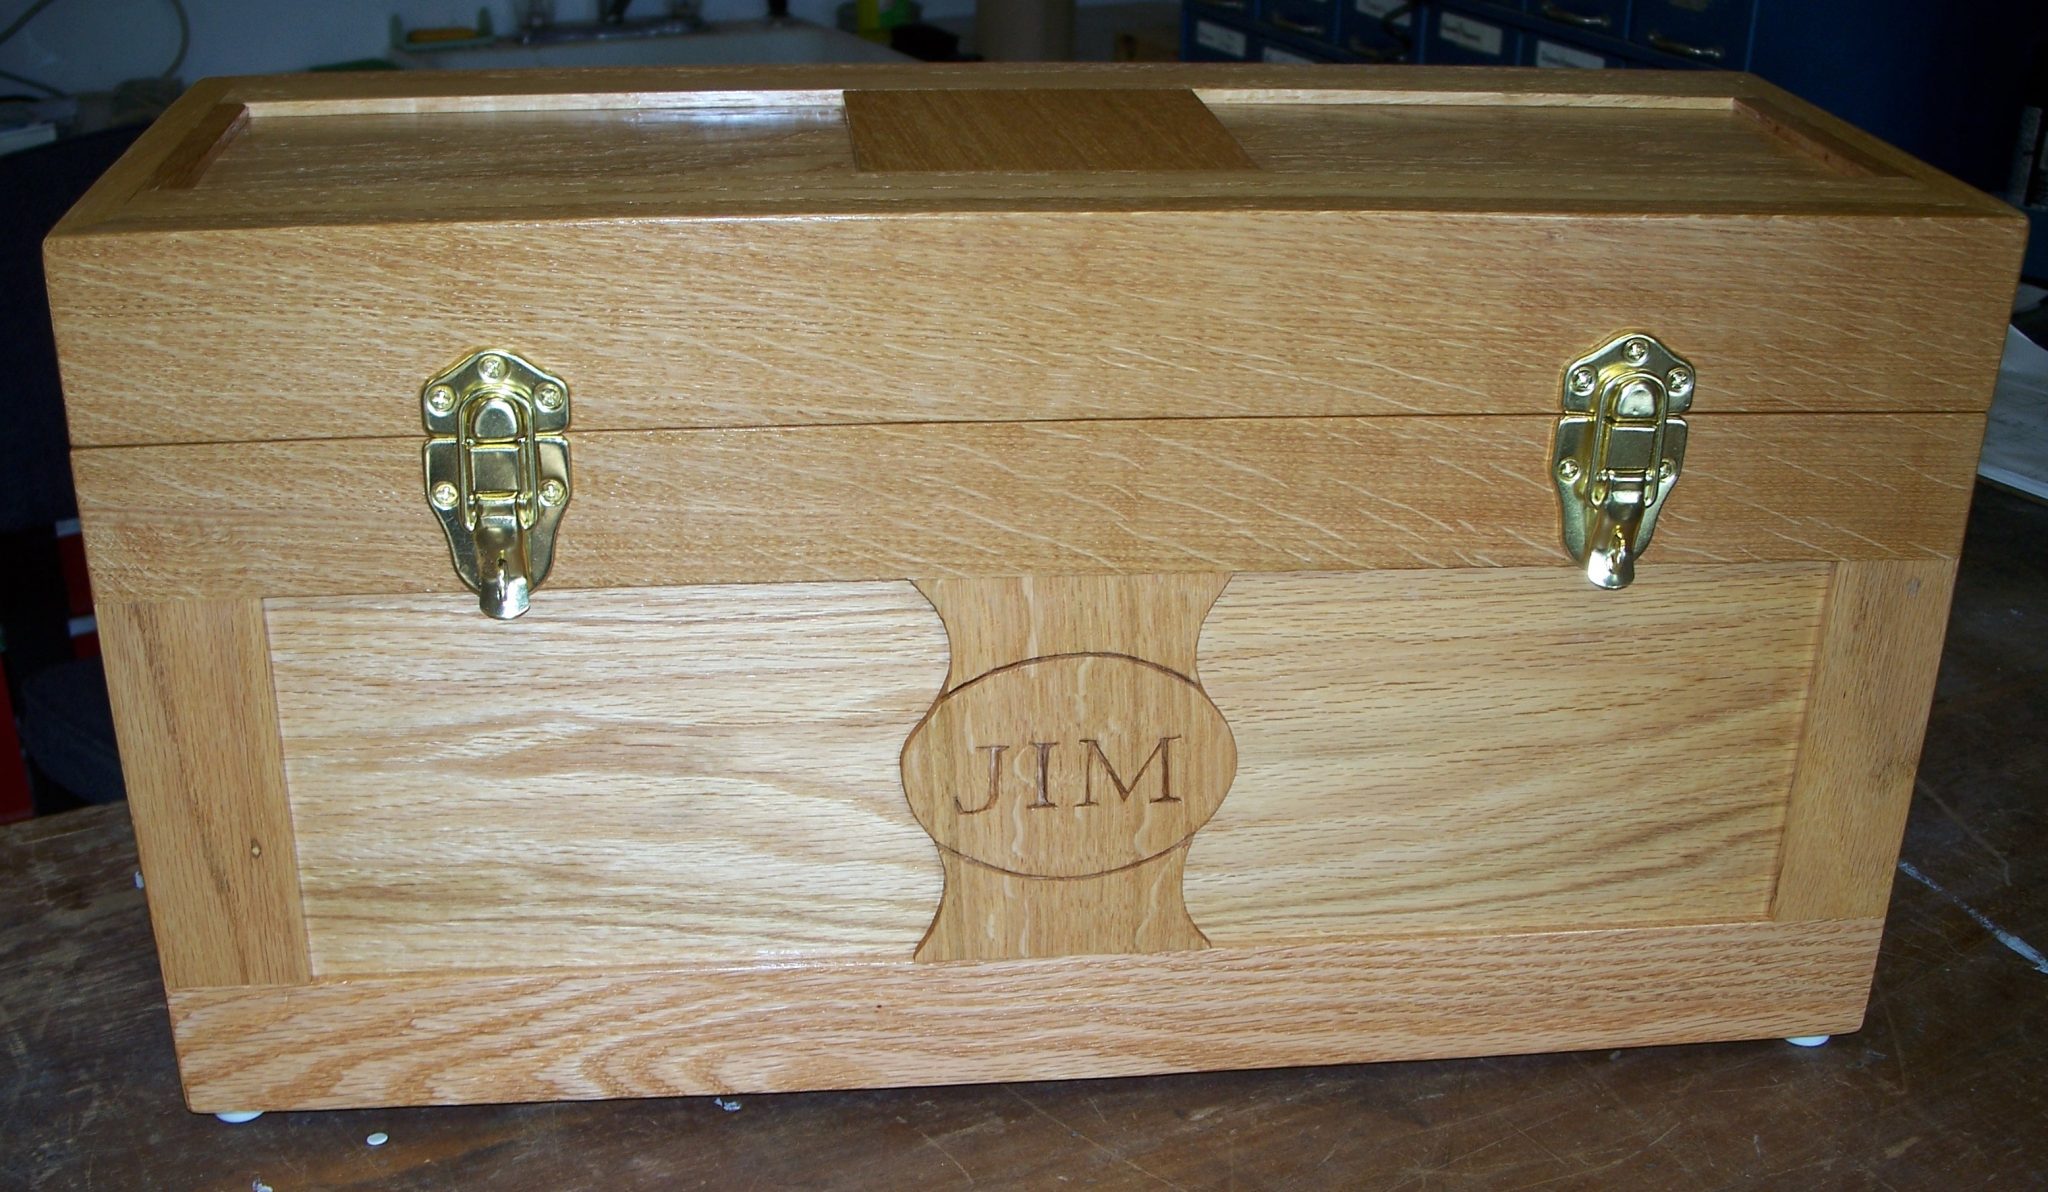 Oak Tool Boxes given to 2 Grandsons.  Populated with a starter set of woodworking tools.